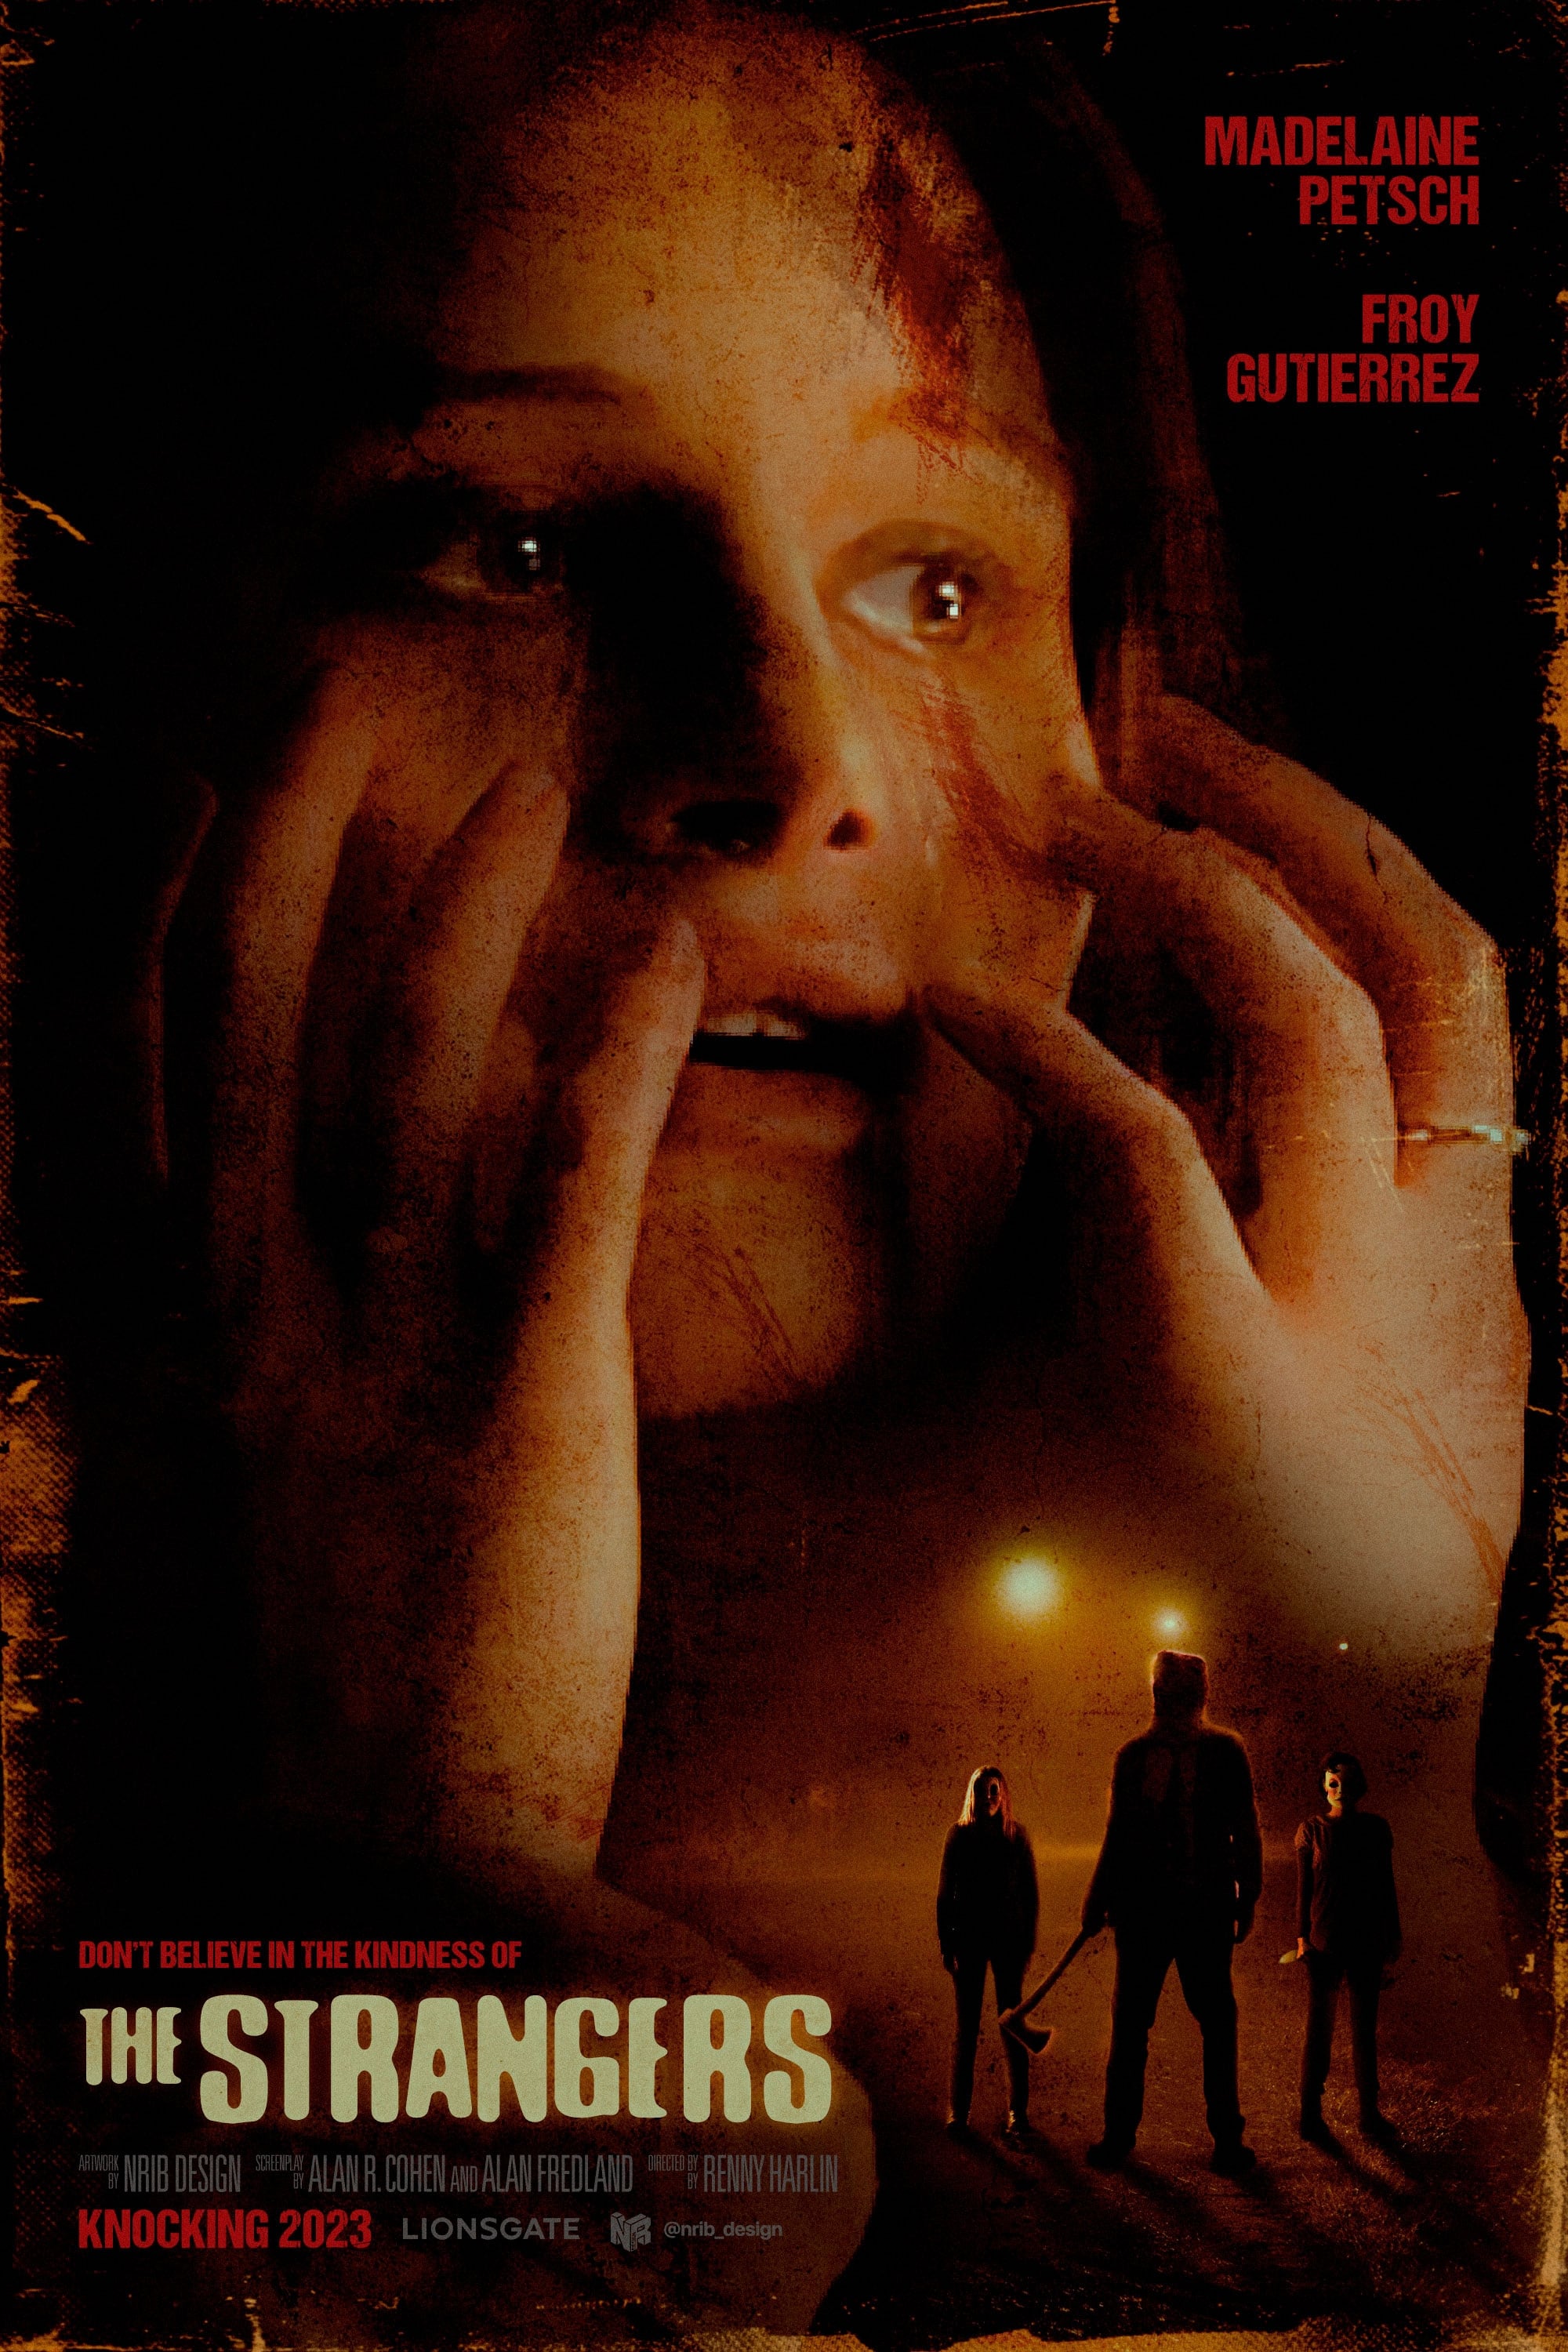 The Strangers Movie poster